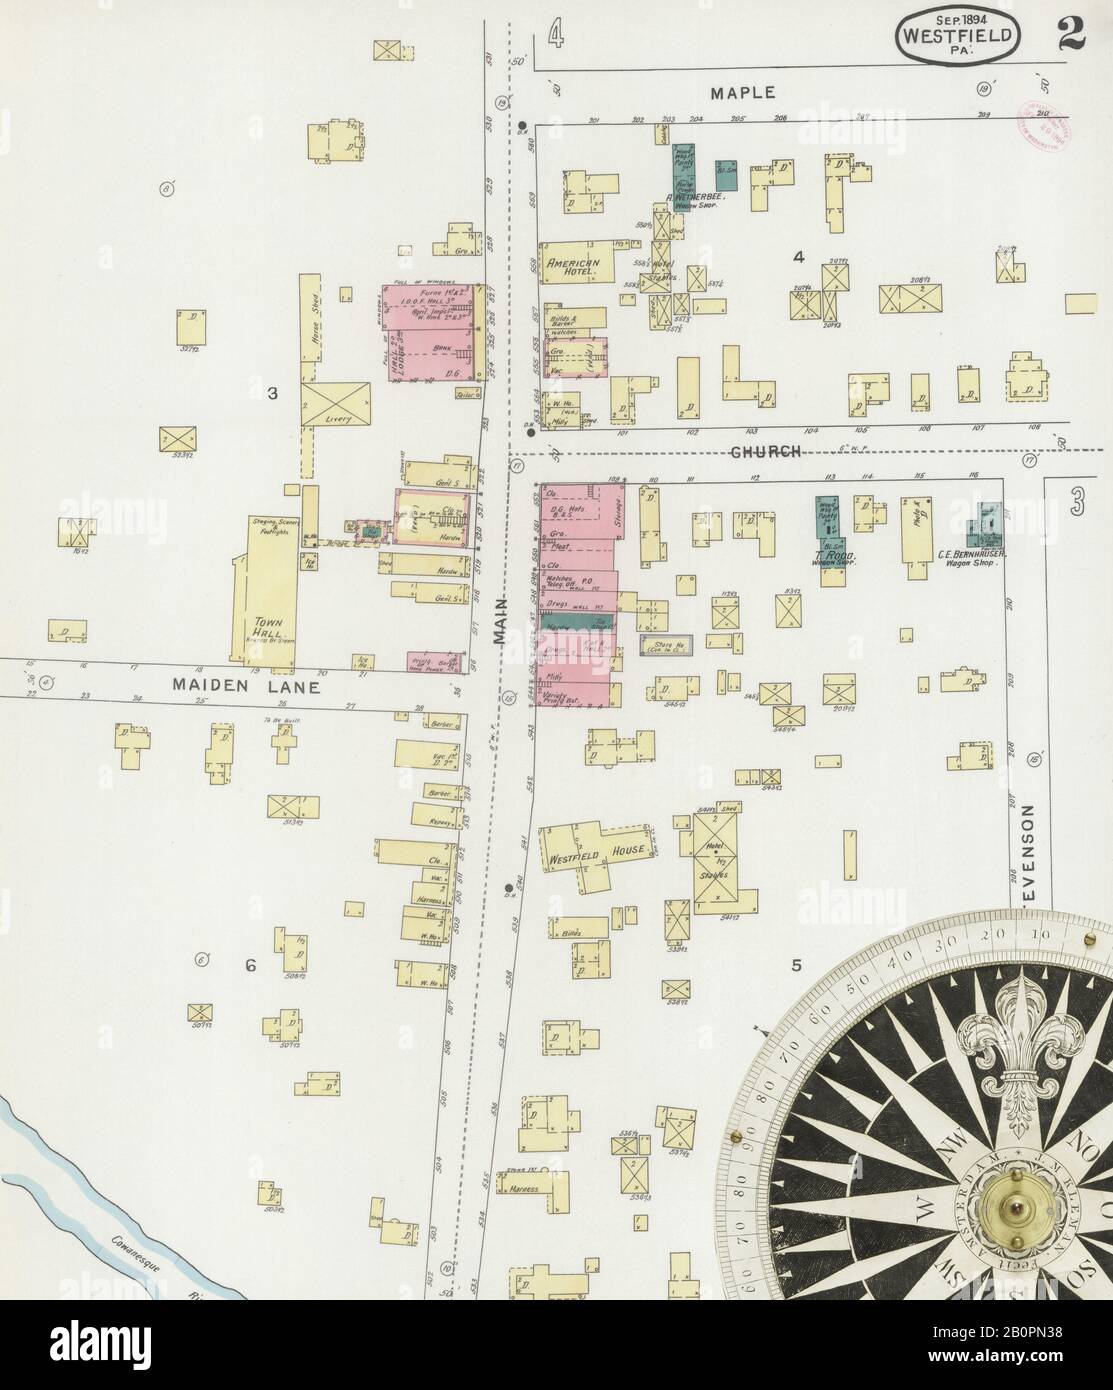 Image 2 of Sanborn Fire Insurance Map from Westfield, Tioga County, Pennsylvania. Sep 1894. 5 Sheet(s), America, street map with a Nineteenth Century compass Stock Photo